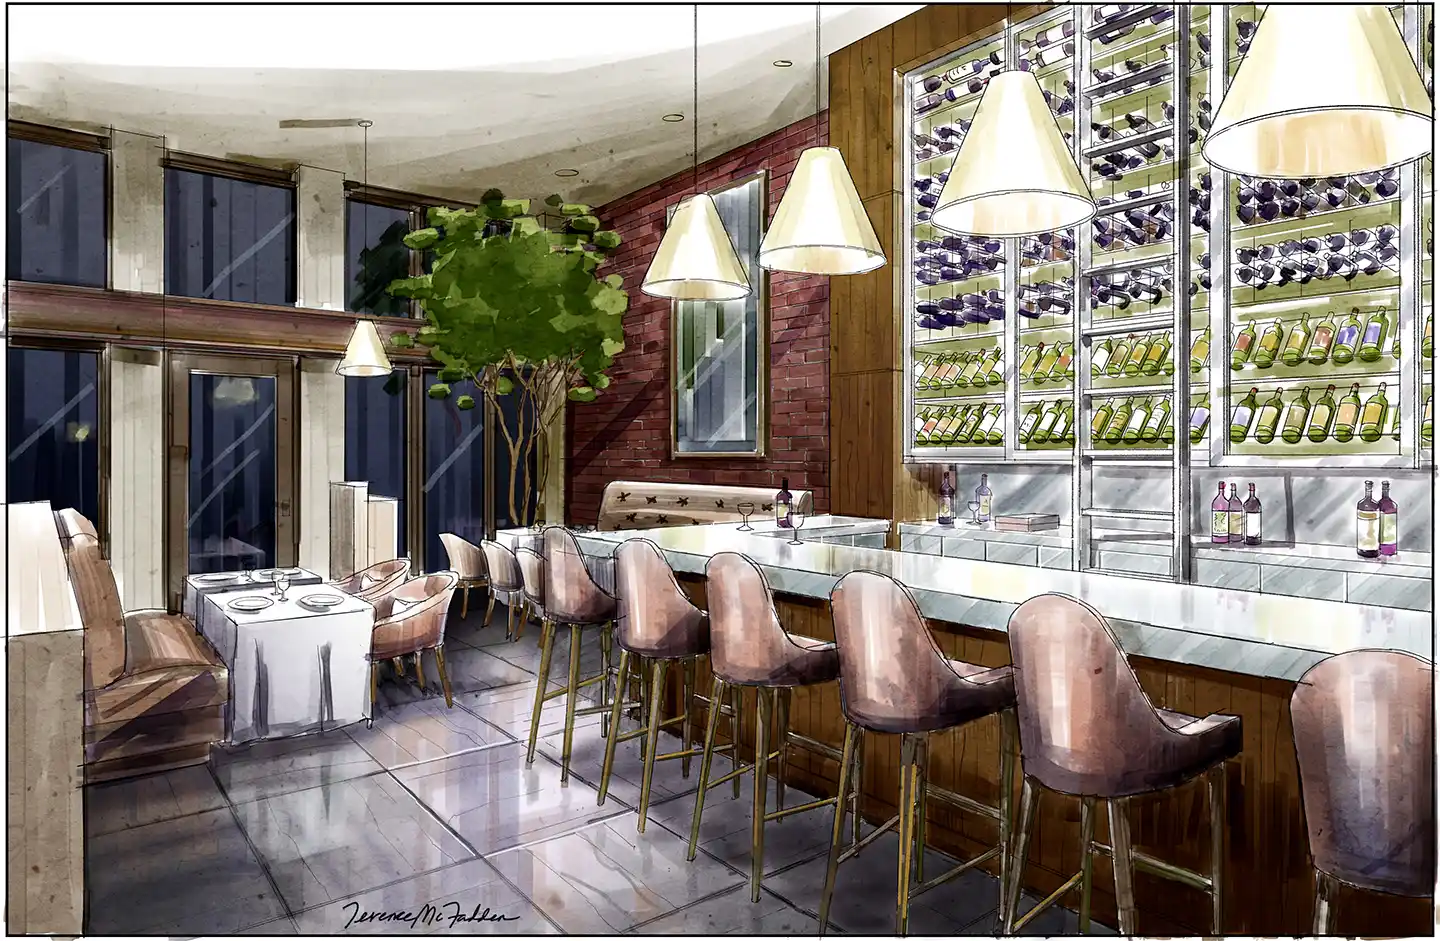 Hand-drawn rendering of a proposed bar and restaurant, West Hollywood CA.